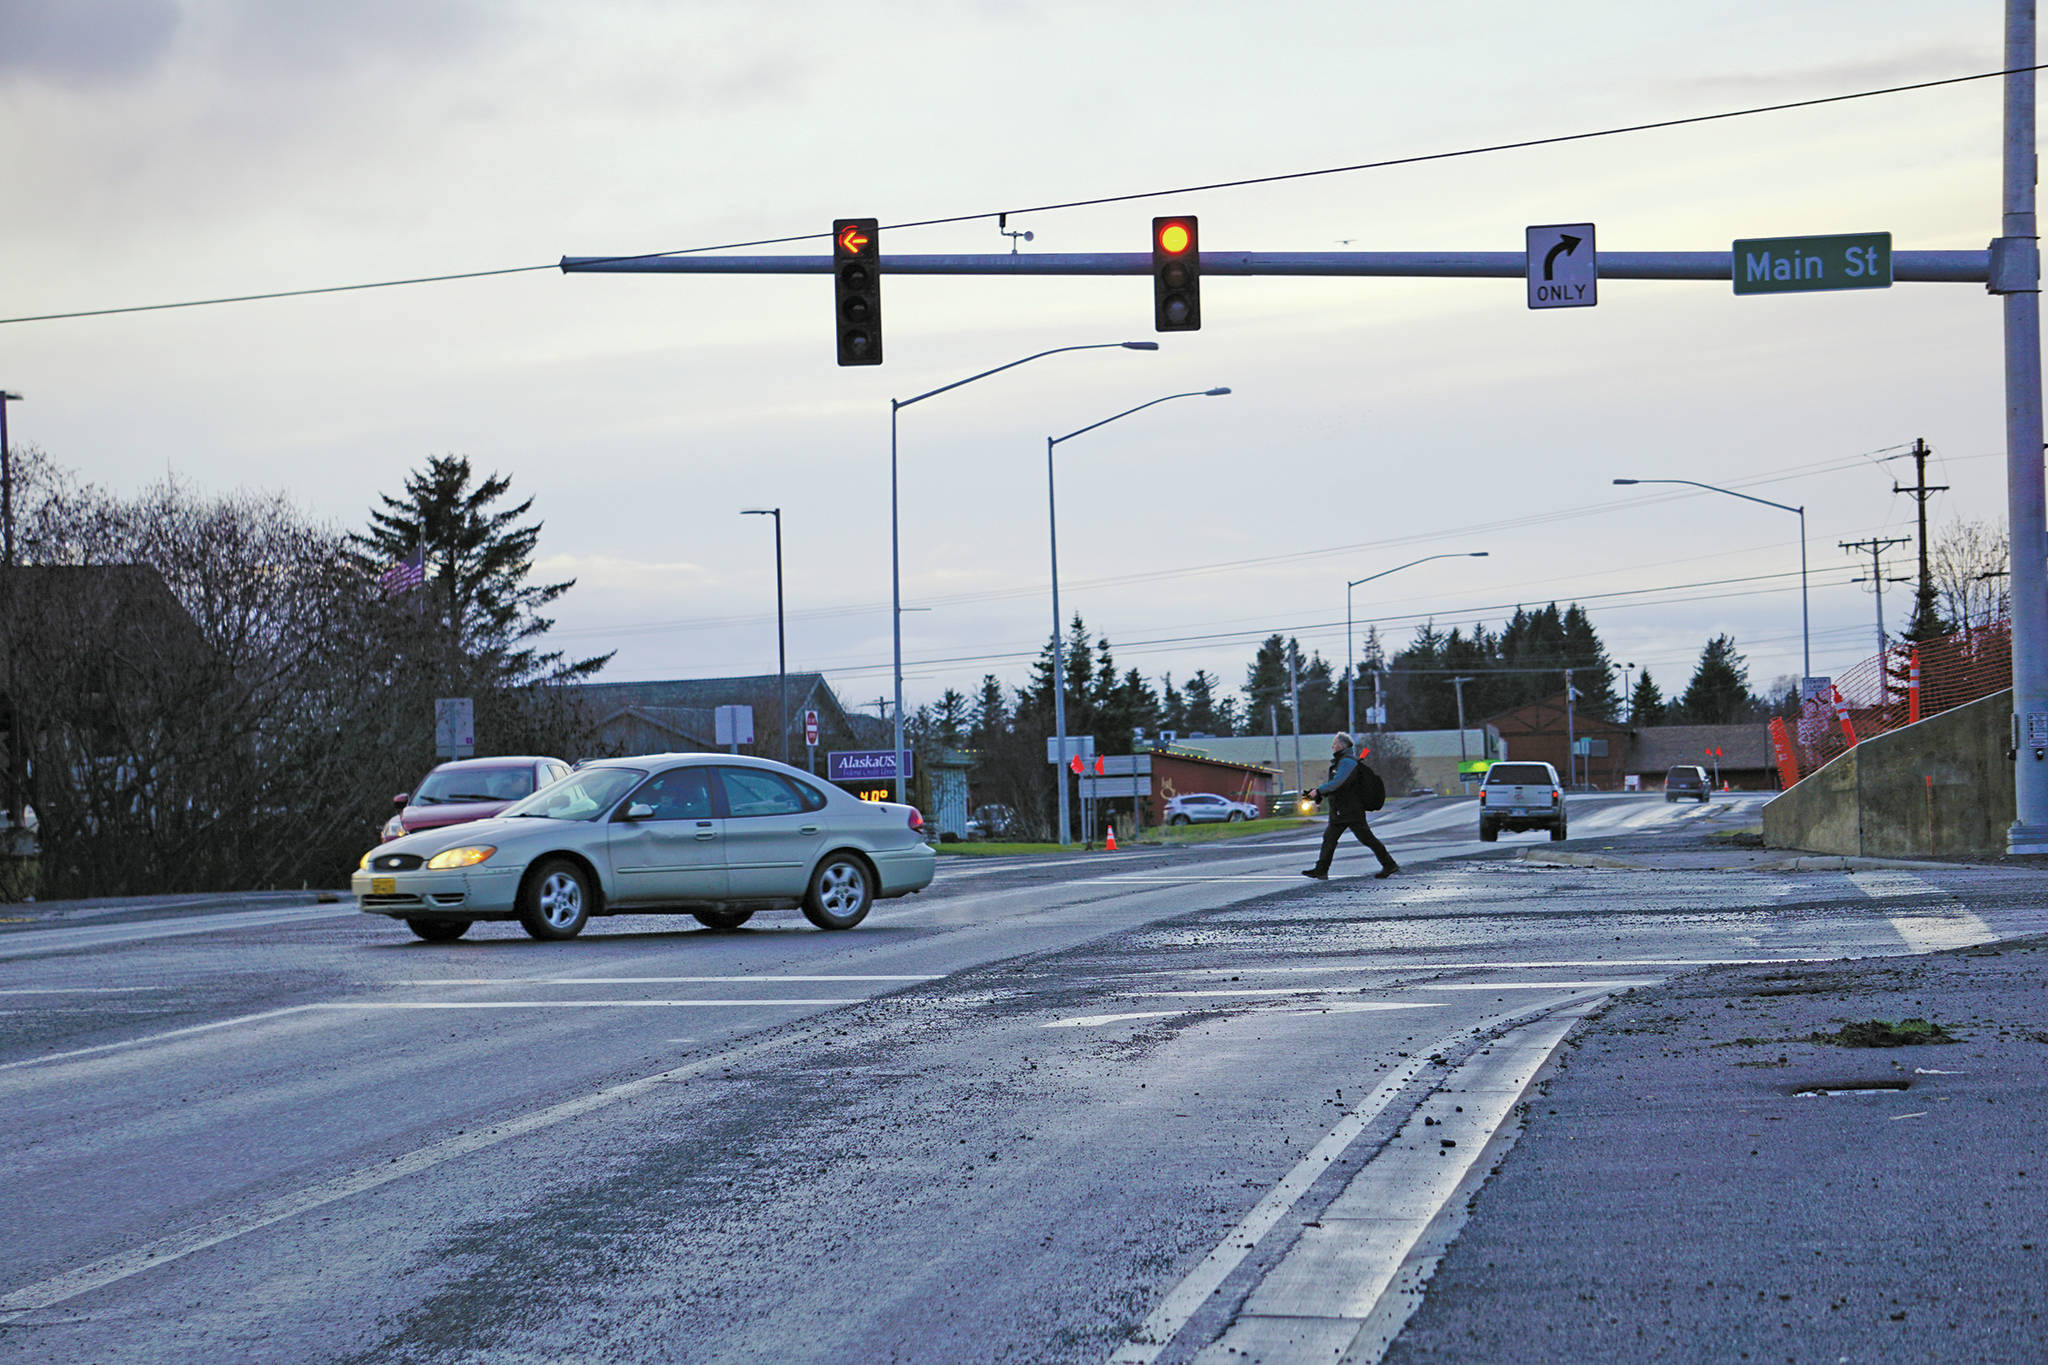 Homer gets its second full traffic signal